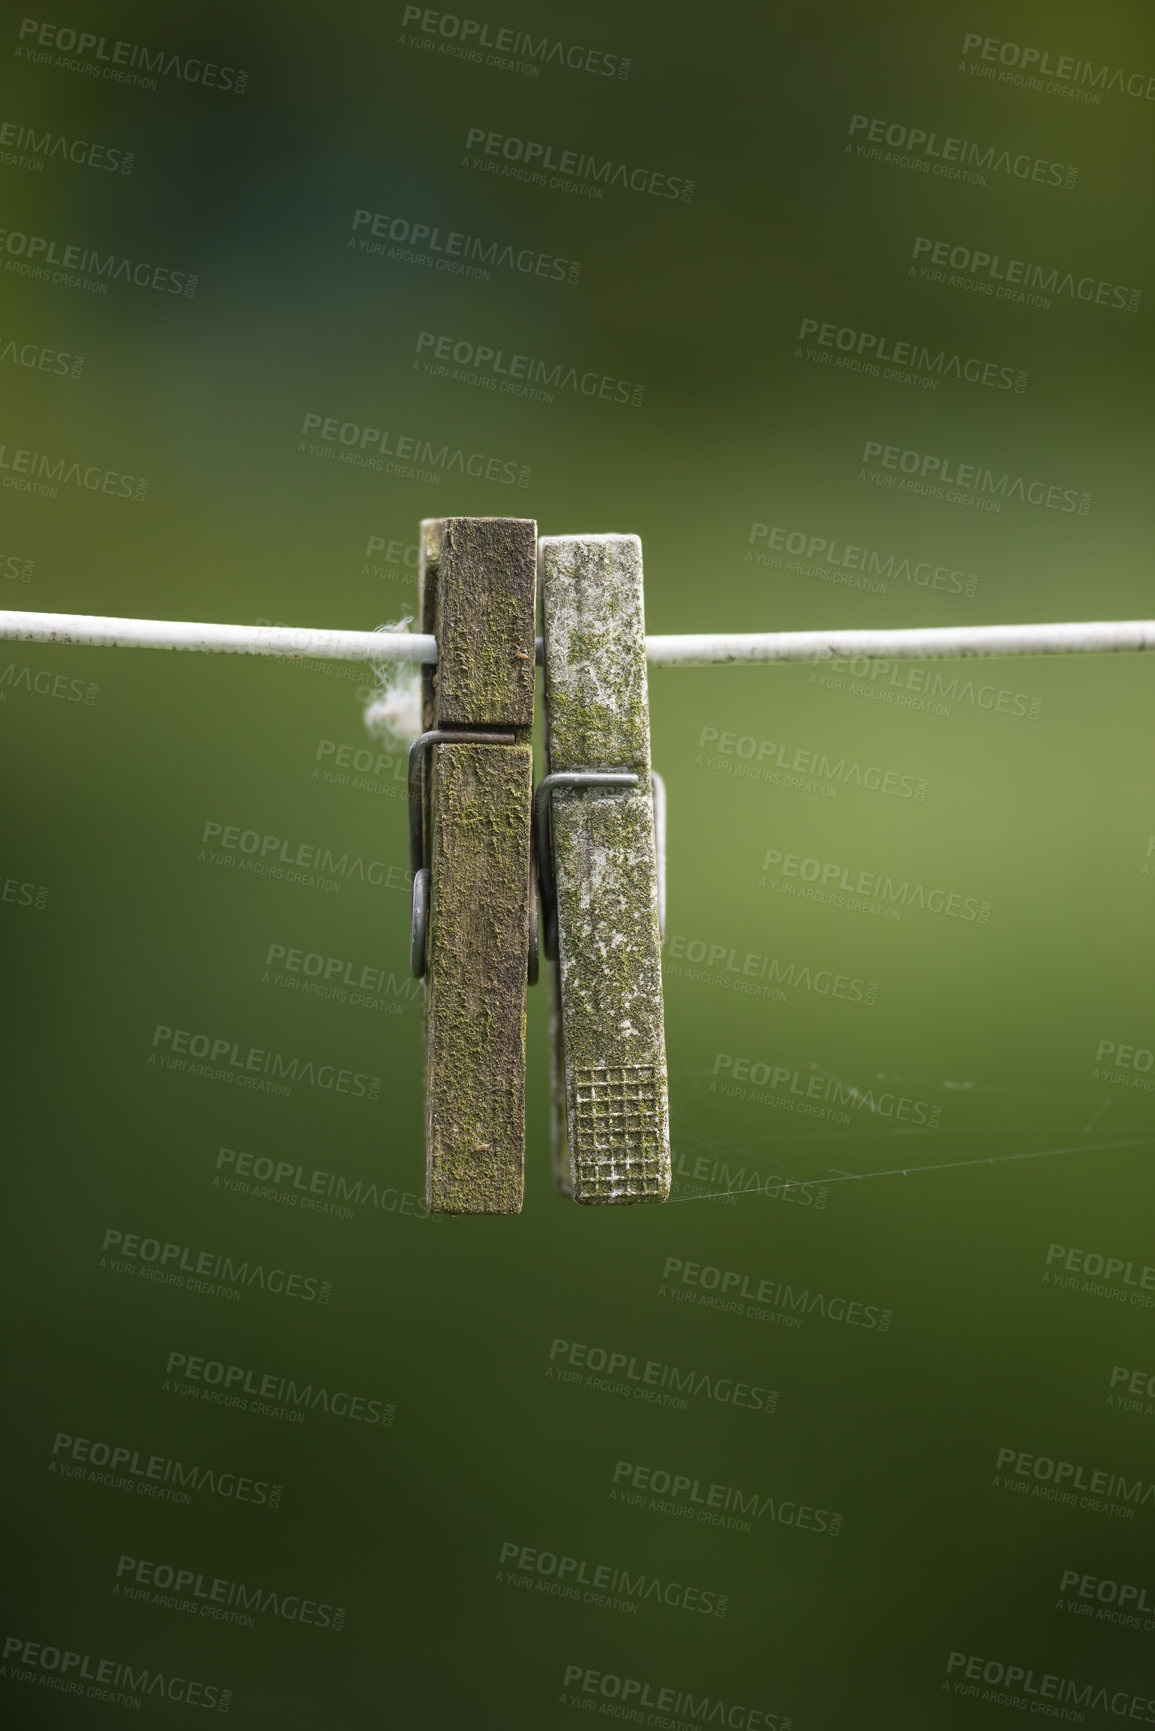 Buy stock photo Copy space of old clothespins hanging on abandoned washing or laundry line with bokeh outside. Closeup of spiderwebs, moss or algae from wet climate neglect covering clothes pegs for housework chores